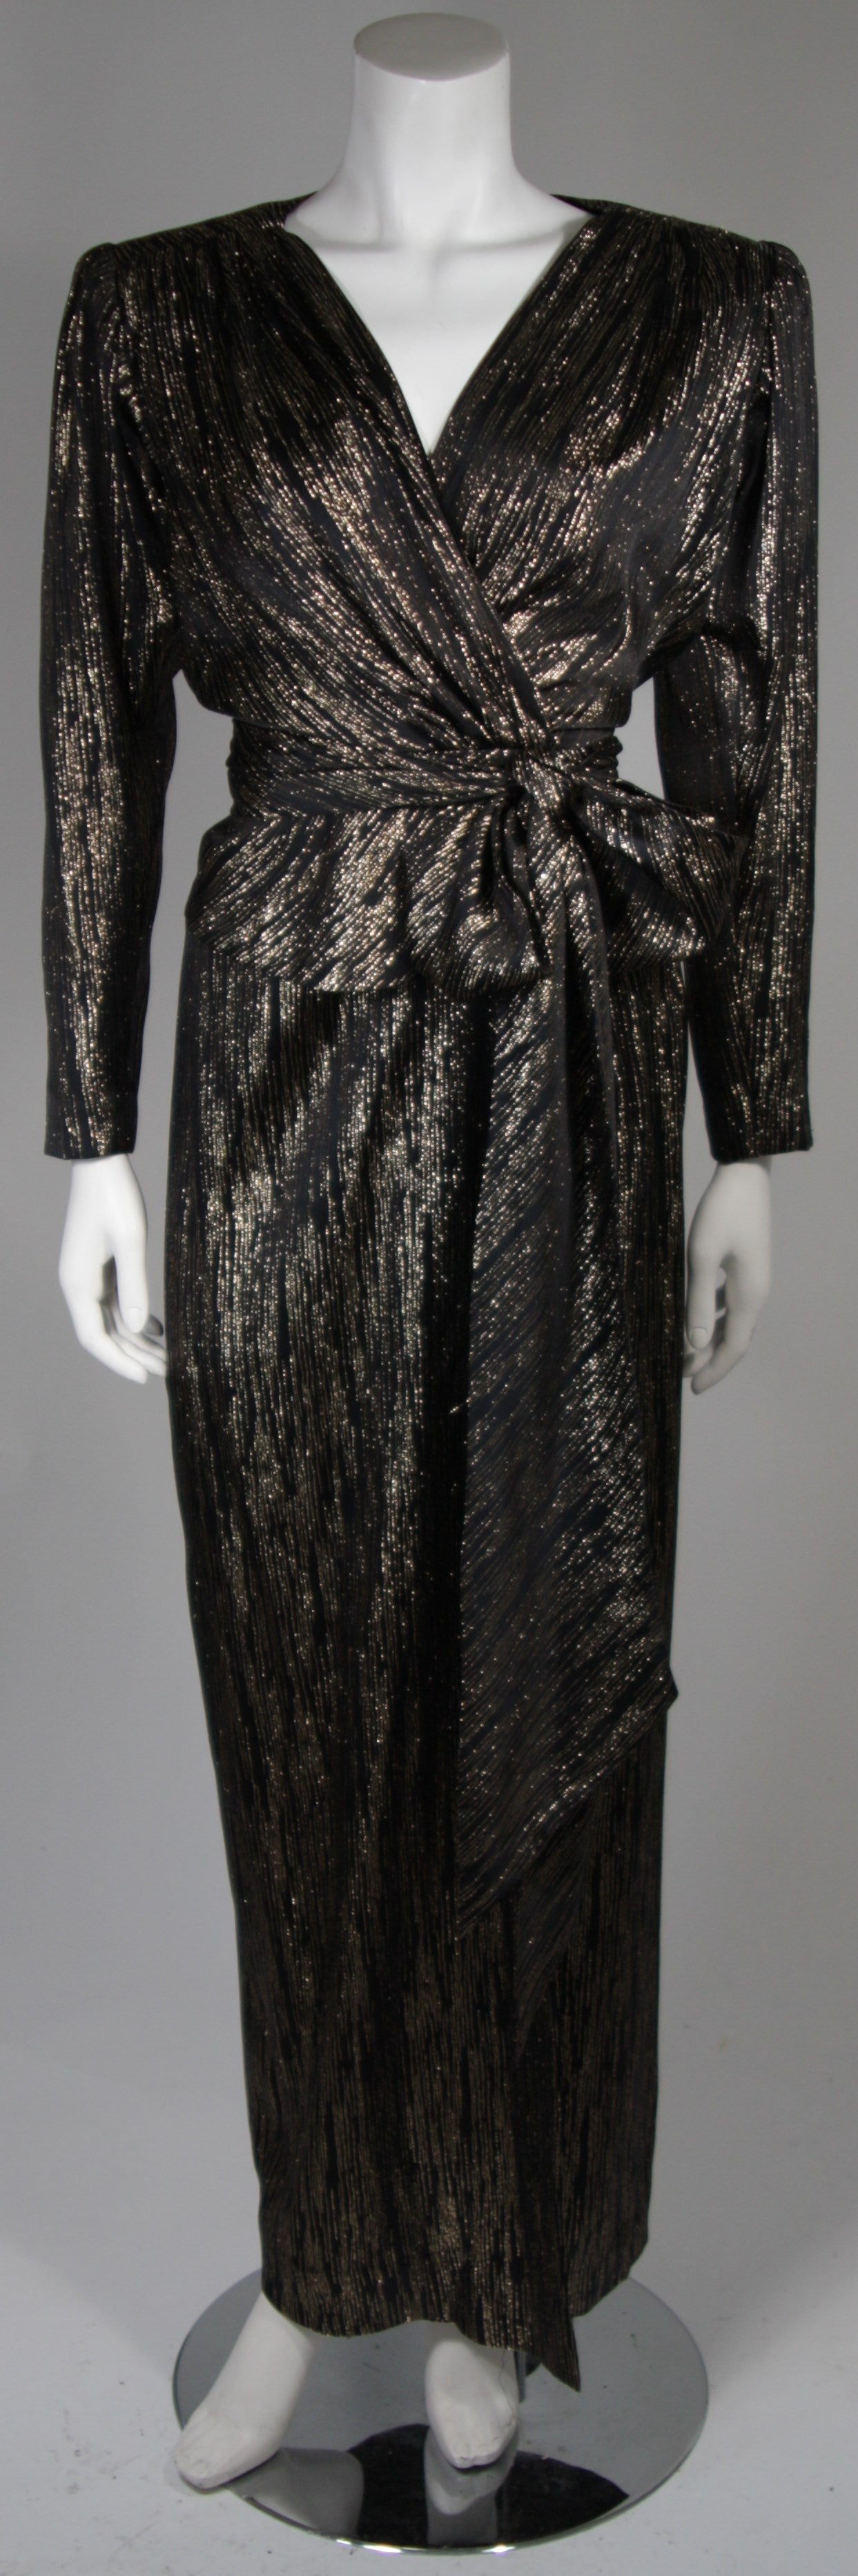 This Nolan Miller attributed ensemble is available for viewing at our Beverly Hills Boutique. We offer a large selection of evening gowns and luxury garments.

This set is composed of a black and gold silk lame. The wrap style blouse and skirt are